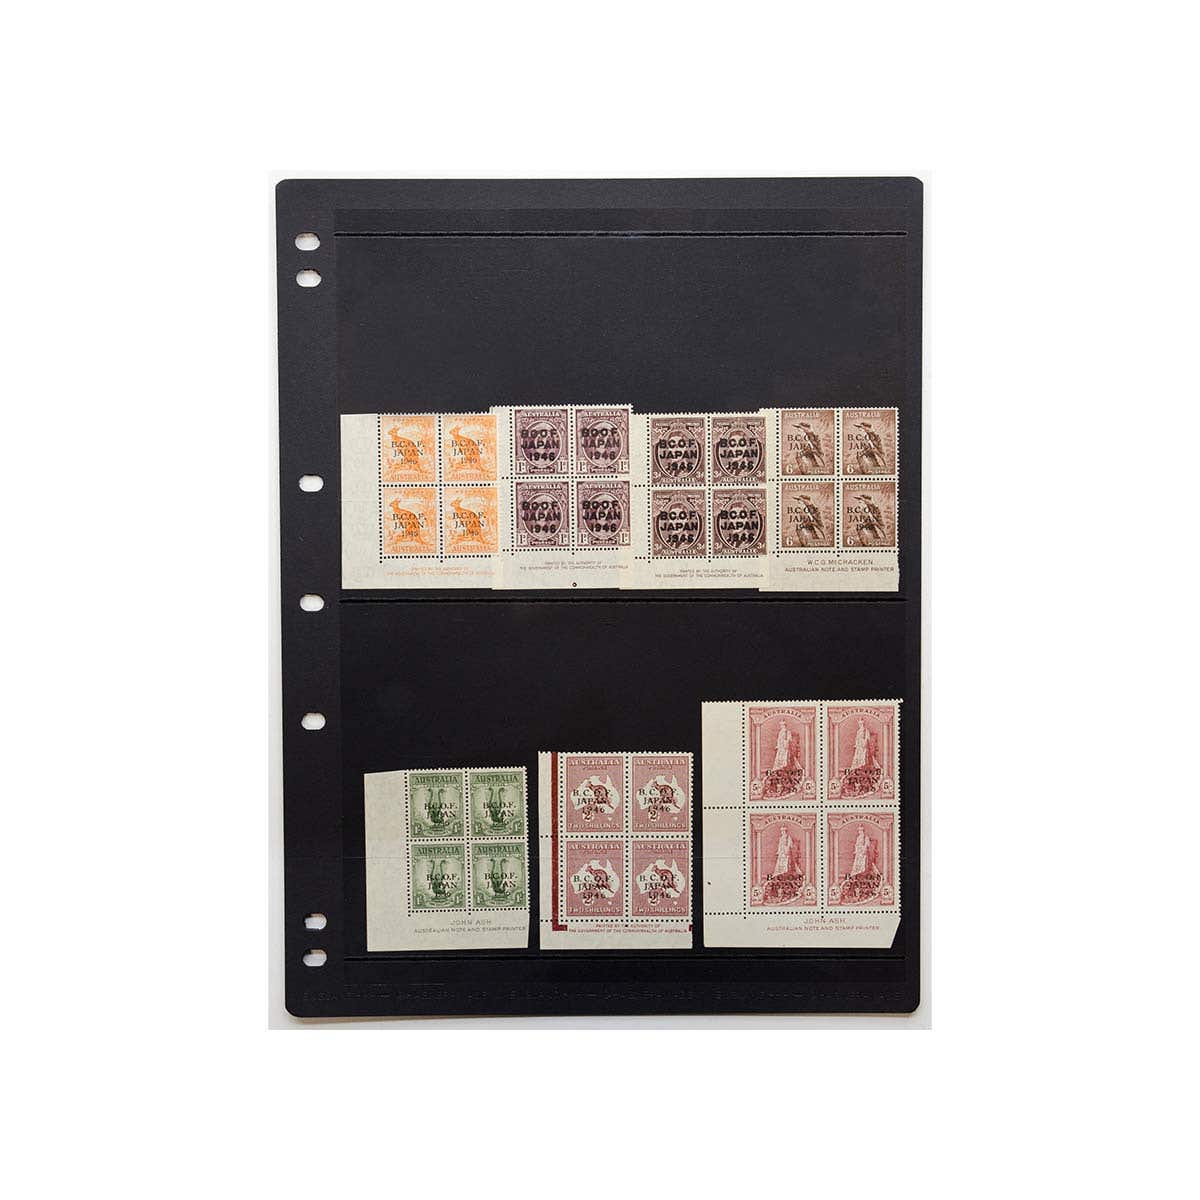 BCOF Japan 1946 Overprints 1/2d - 5/- Stamps Block of Four Collection Mint Unhinged (28 stamps)